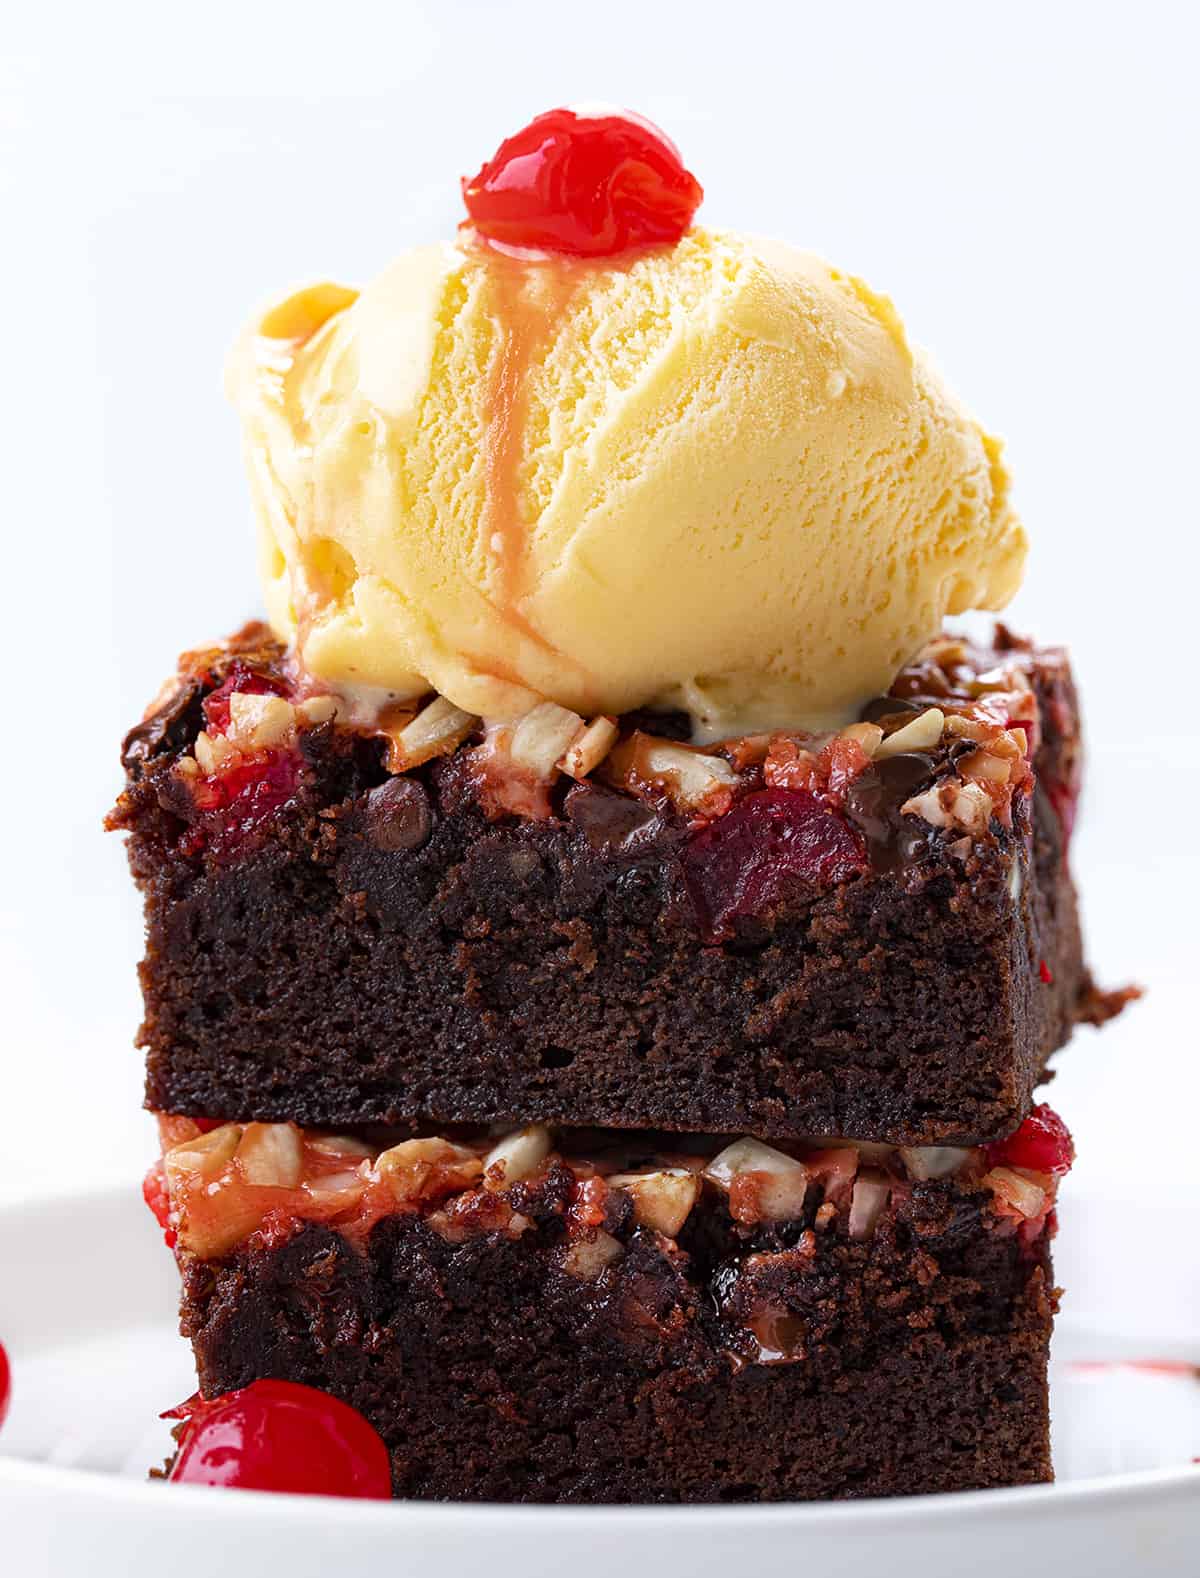 Stack of Cherry Chocolate Magic Brownies on a Plate with Ice Cream and a Cherry on Top.